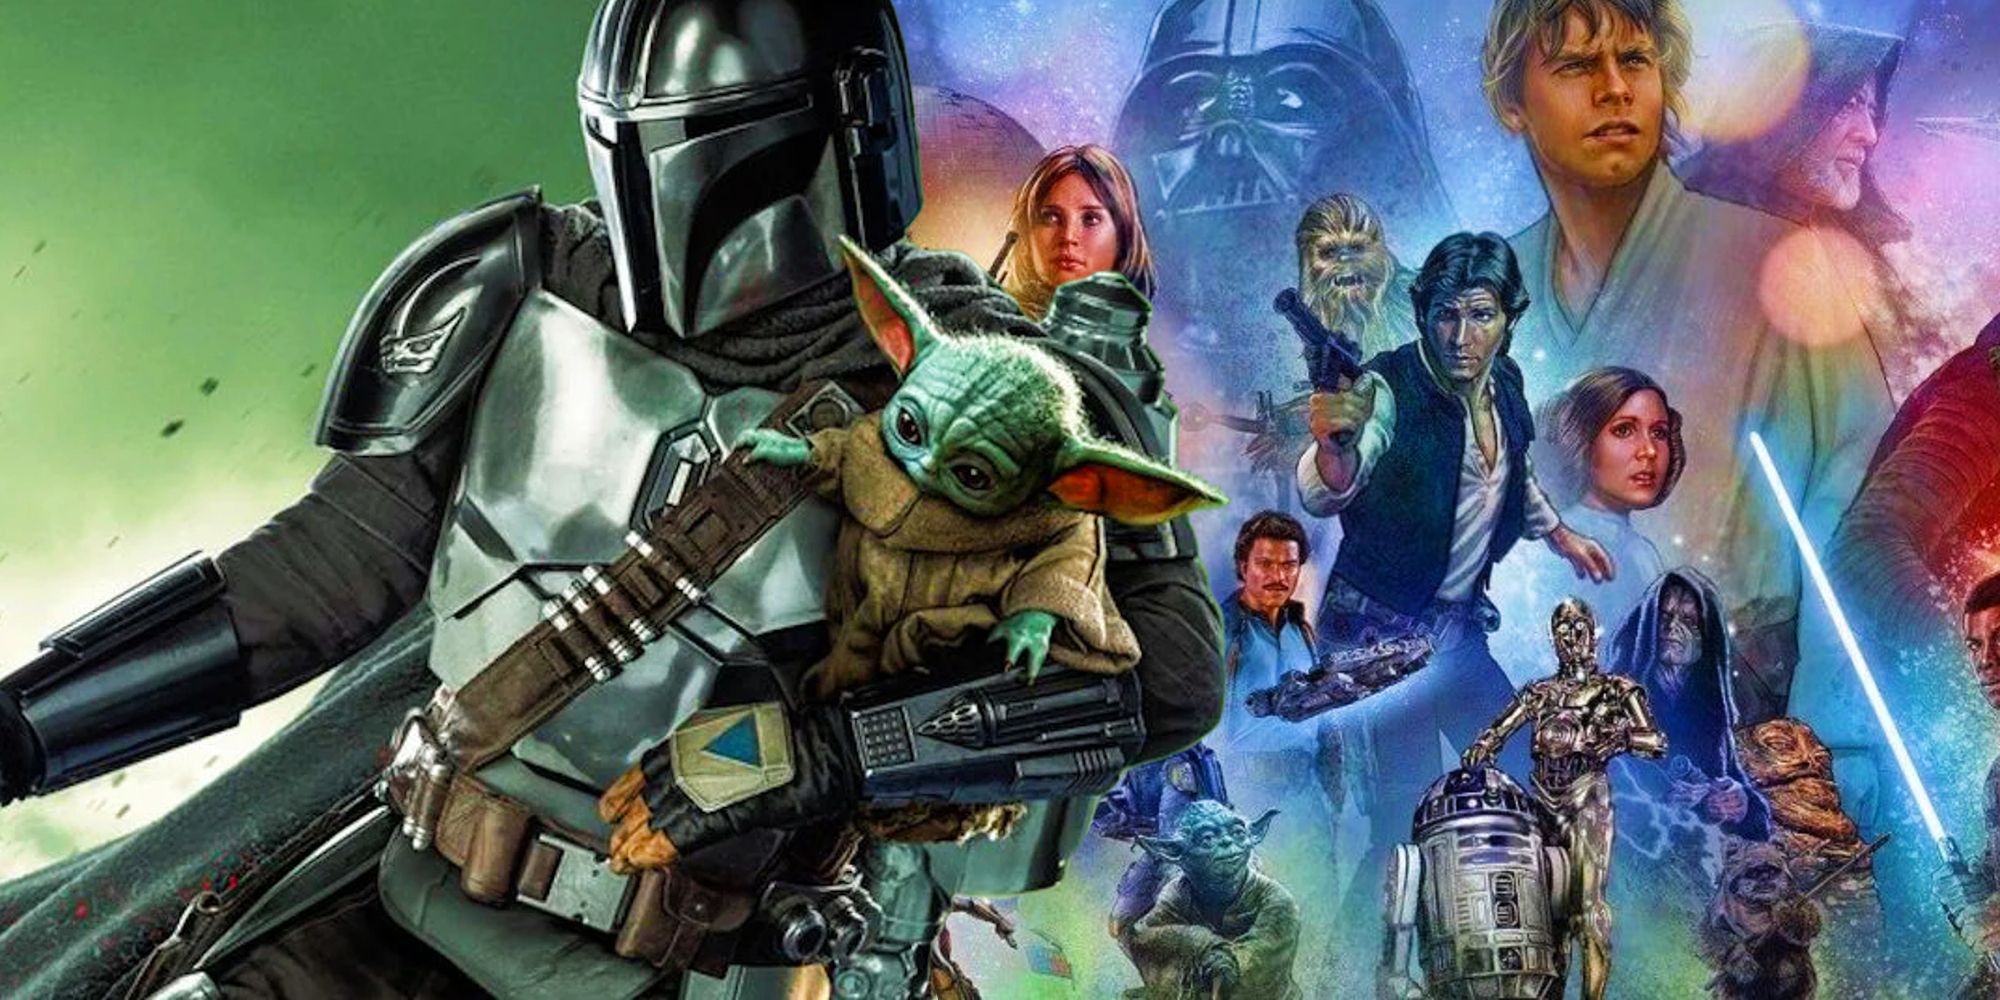 Din Djarin holding Grogu in The Mandalorian season 3's poster next to a mural for Star Wars: A New Hope